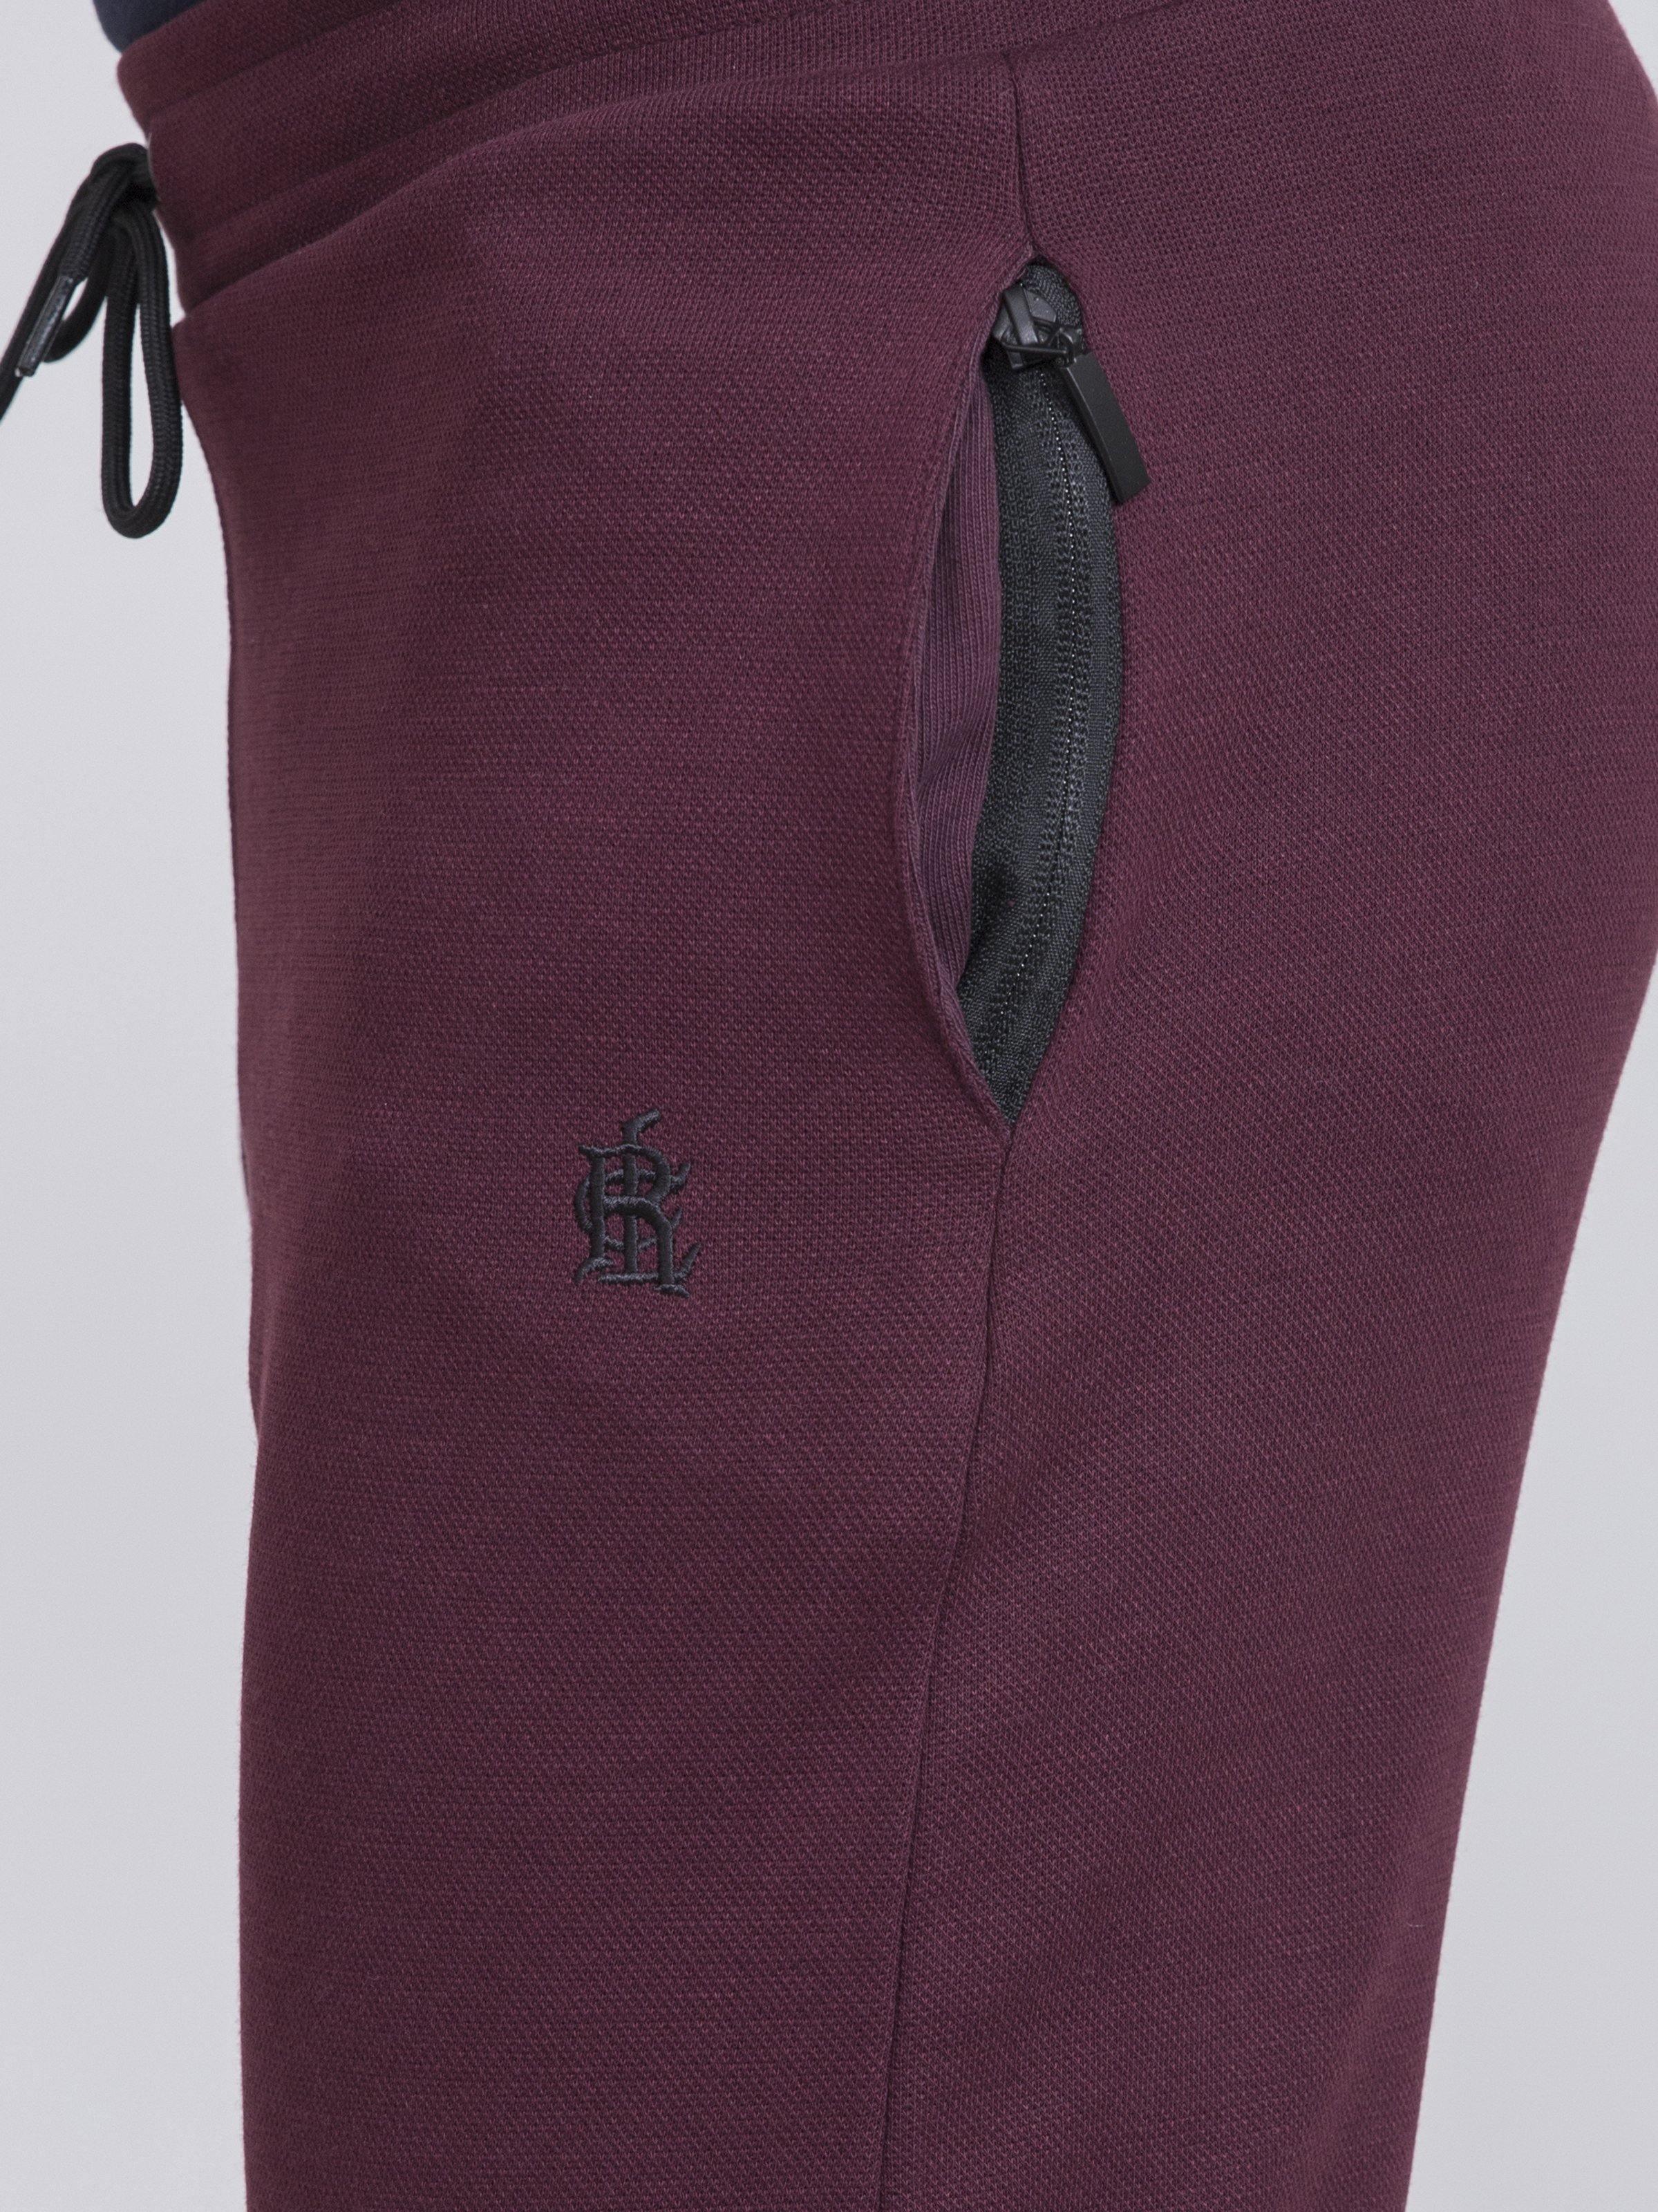 PIQUE INTERLOCK  SLIM FIT MAROON TROUSER at Charcoal Clothing